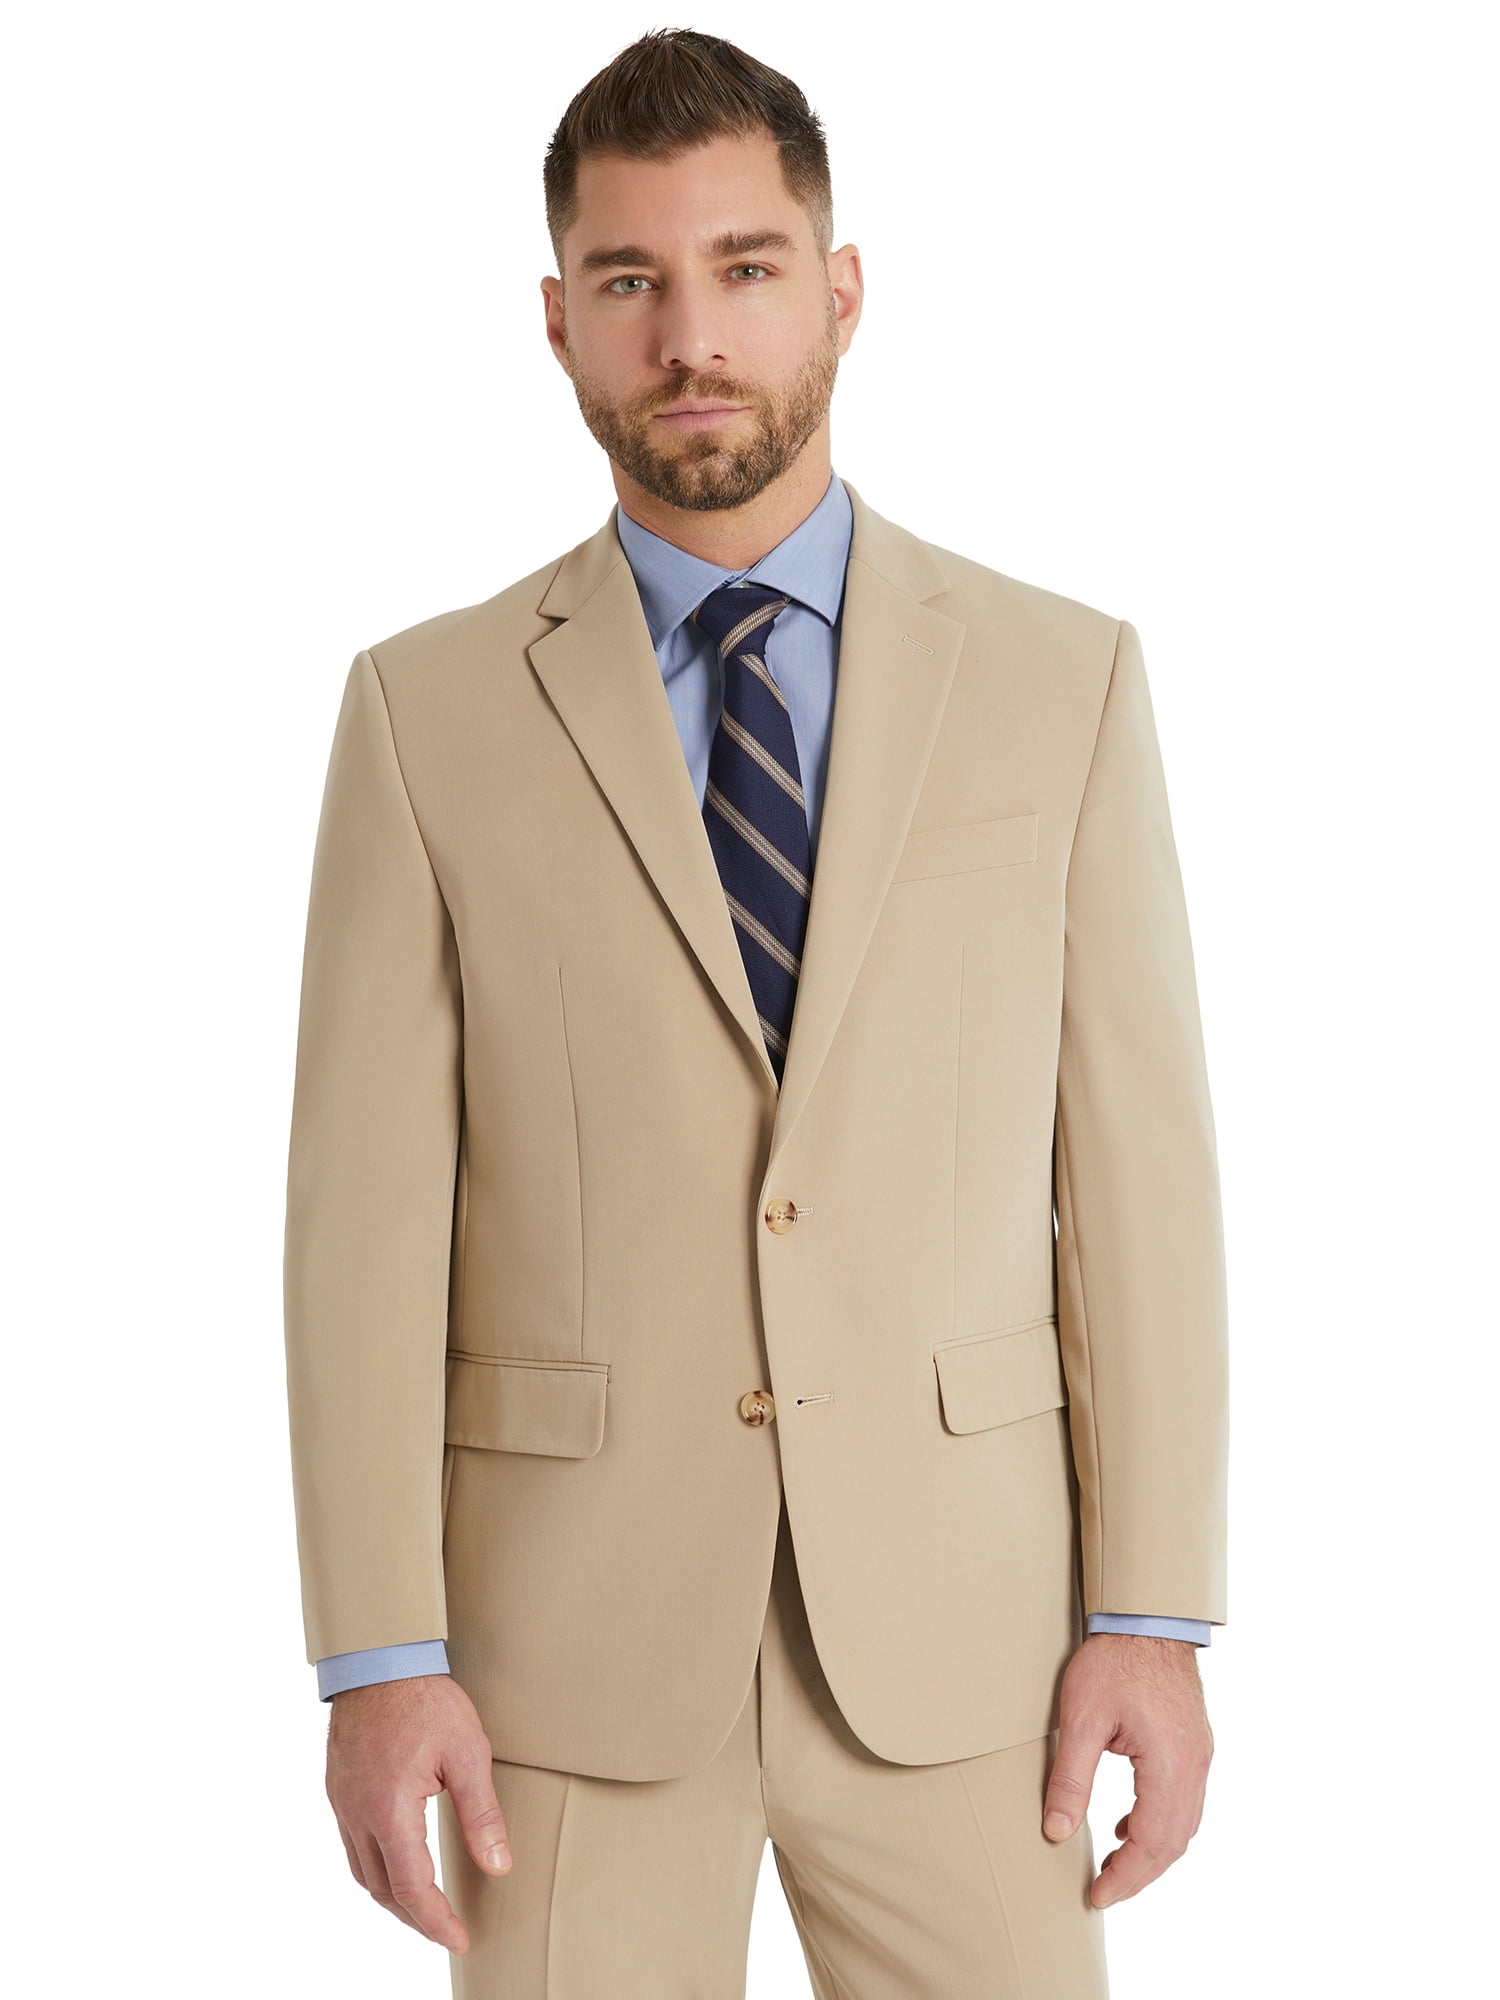 Chaps Men's Solid Classic Fit Tailored Suit Separate Jacket, Size: 40S, Green